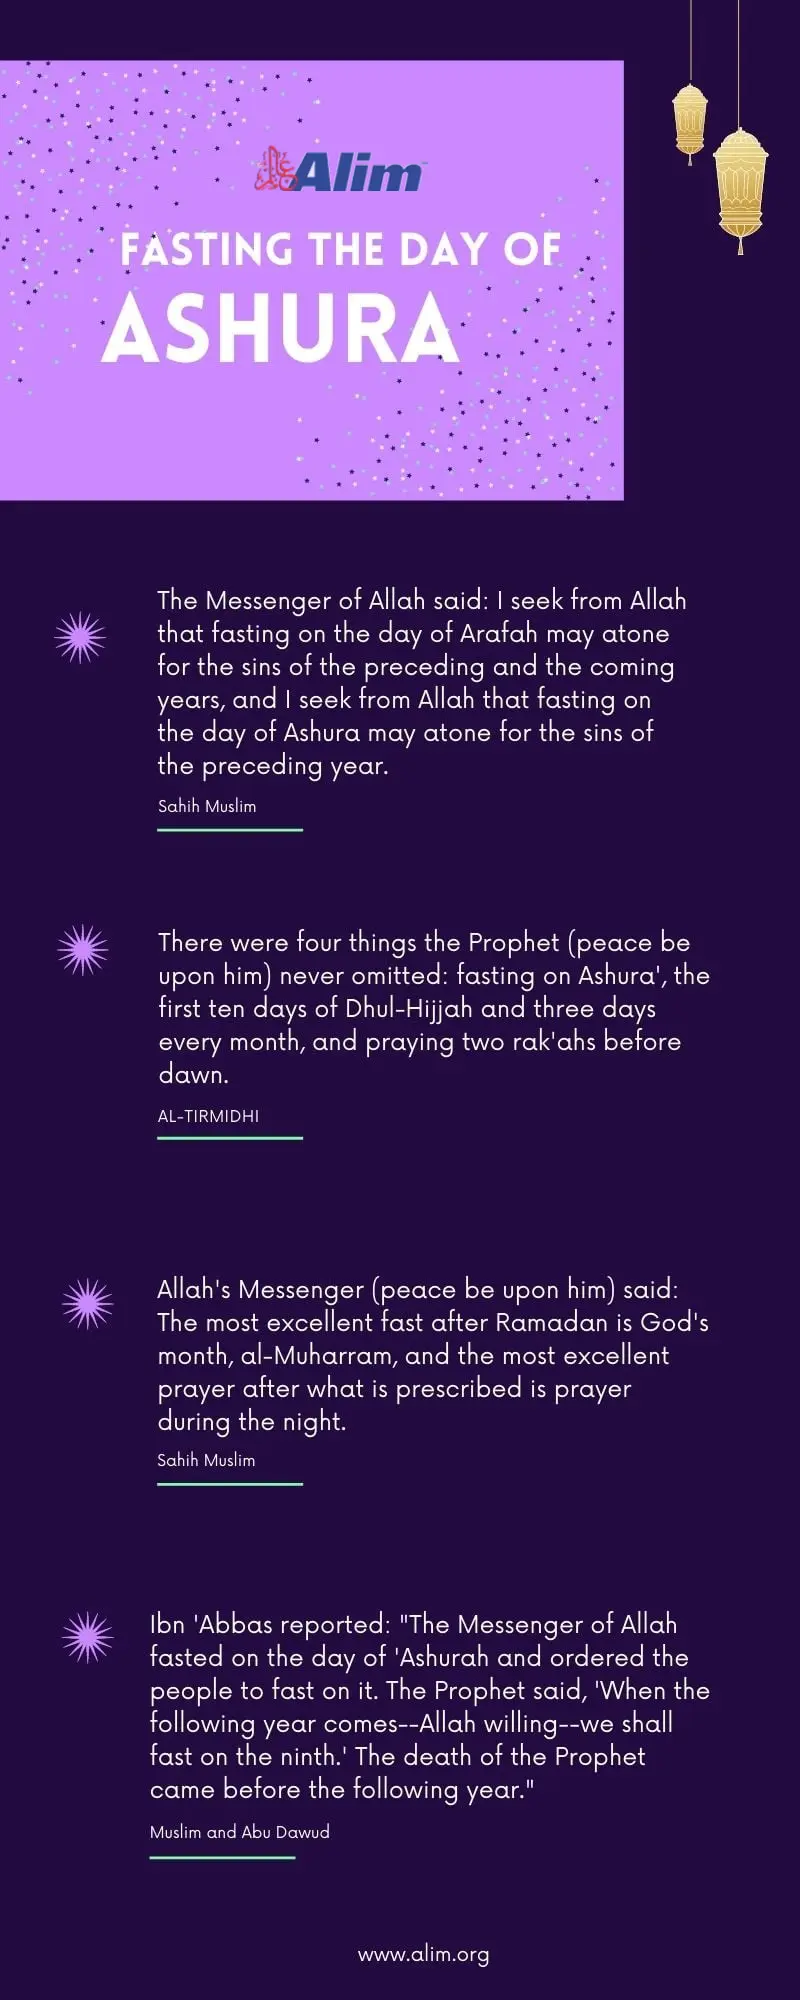 Fasting the day of Ashura